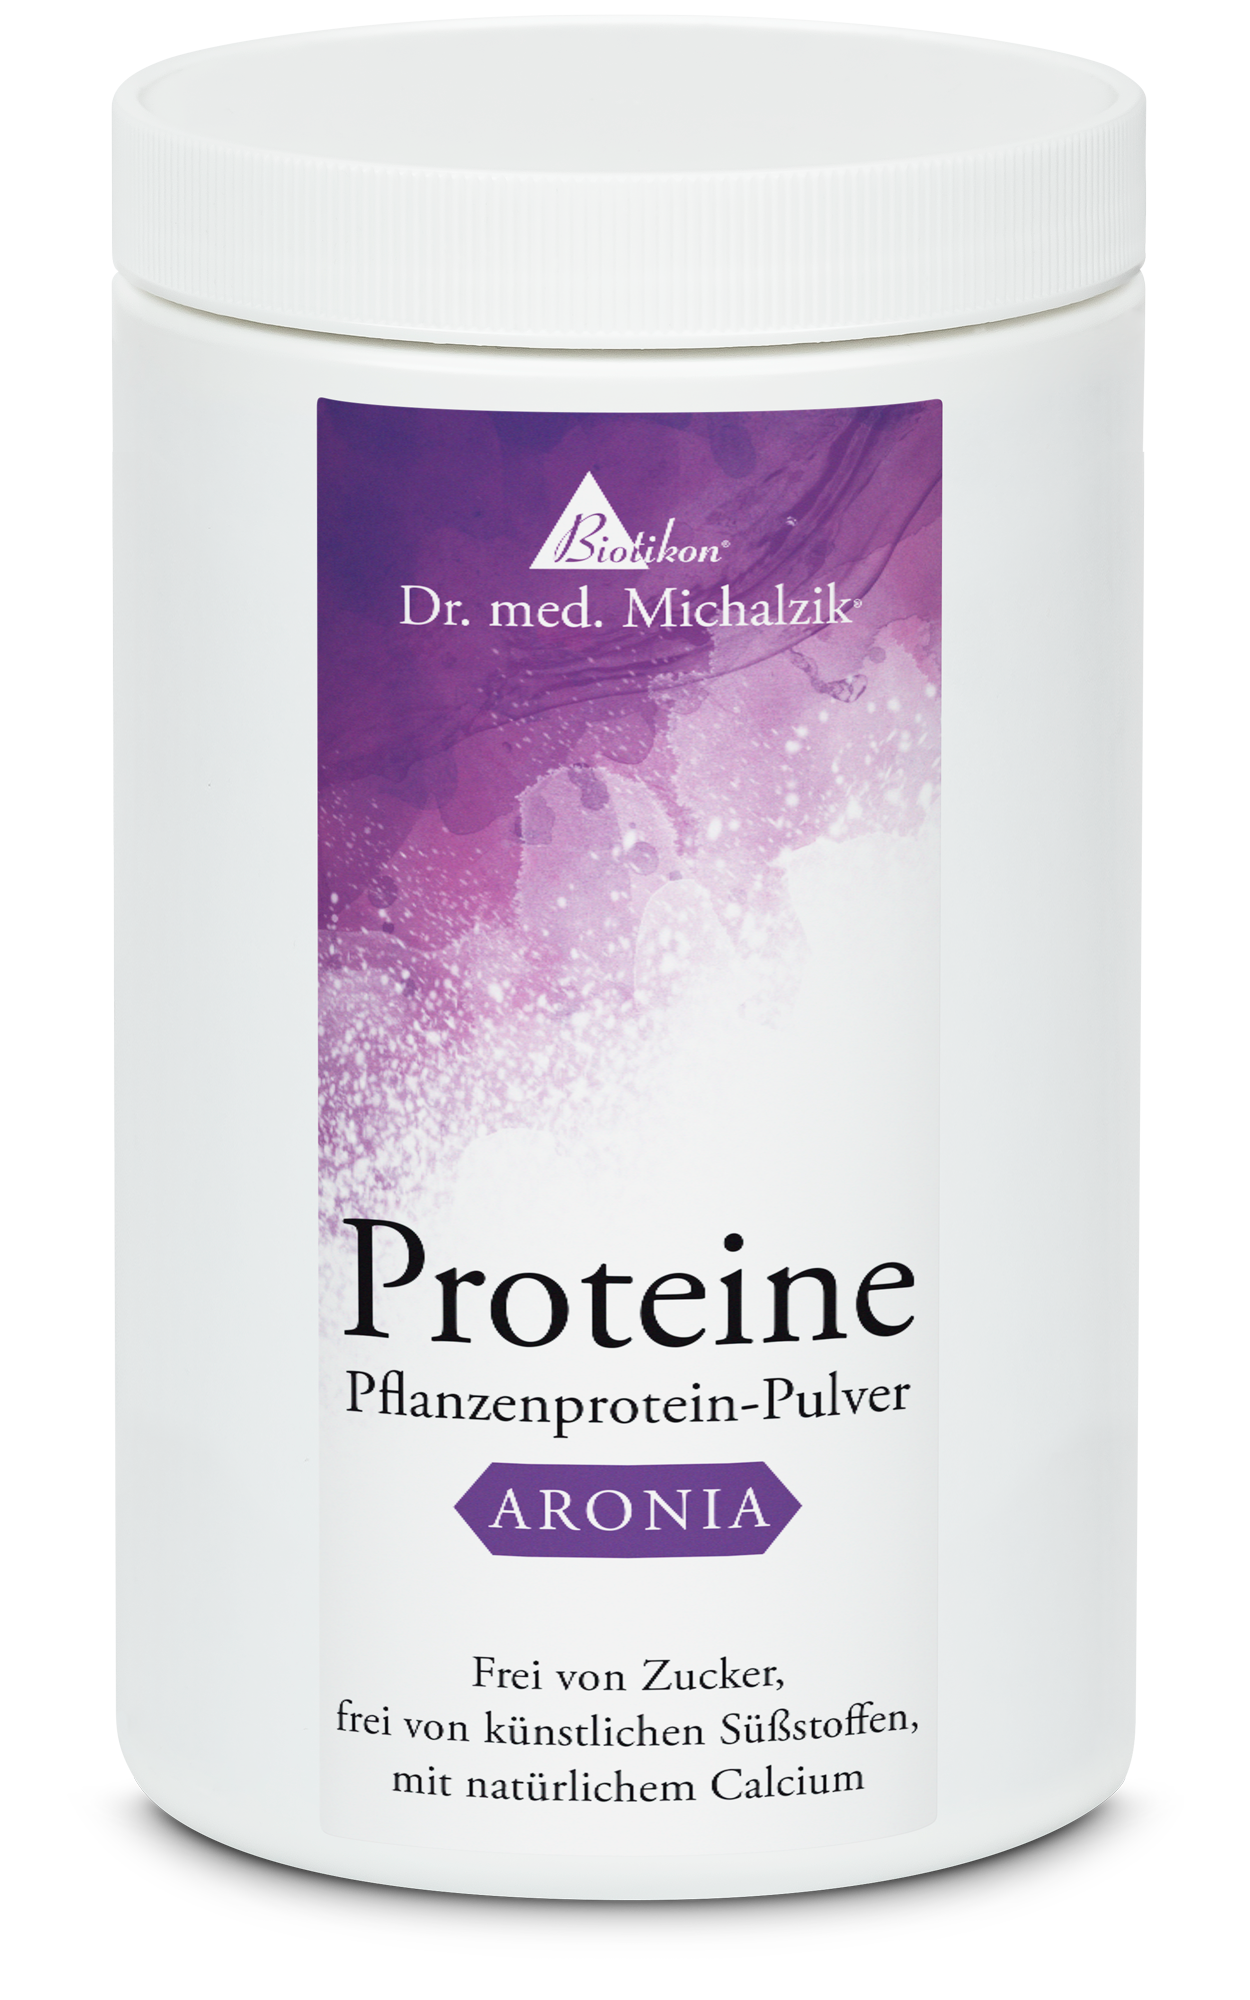 Protein - Aronia flavour by Dr. med. Alexander Michalzik